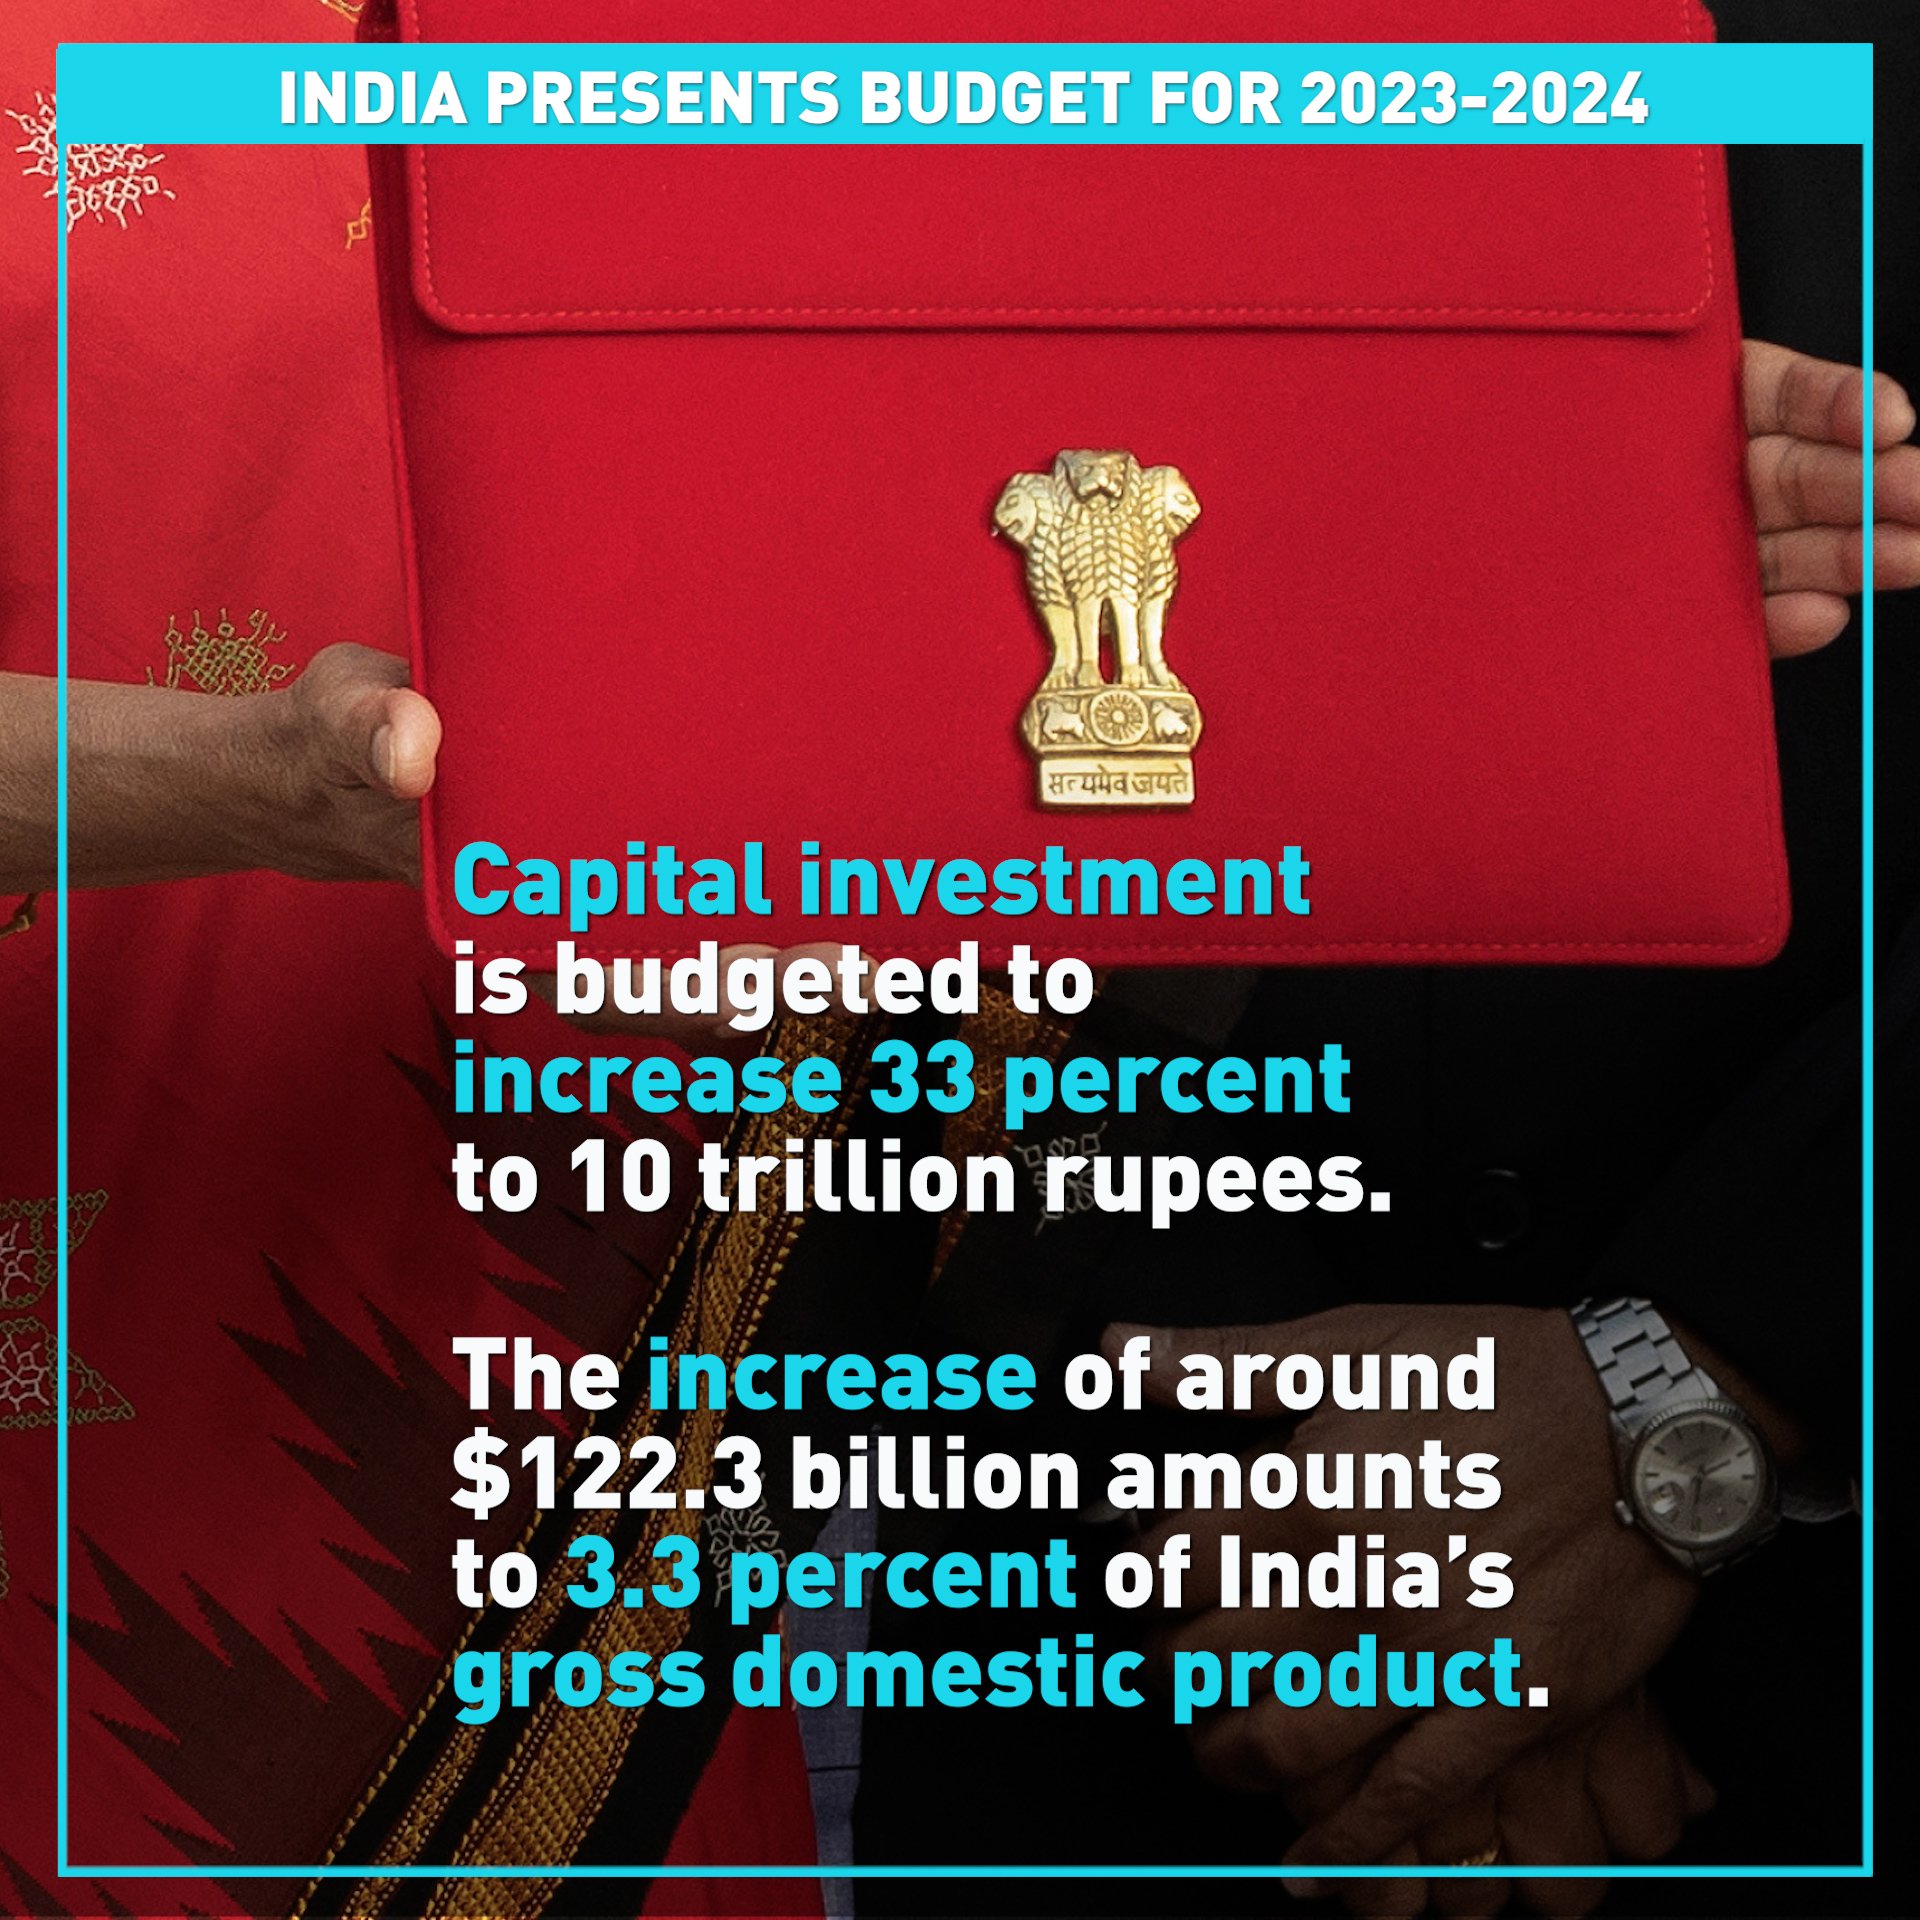 India presents budget for fiscal year 2023-2024